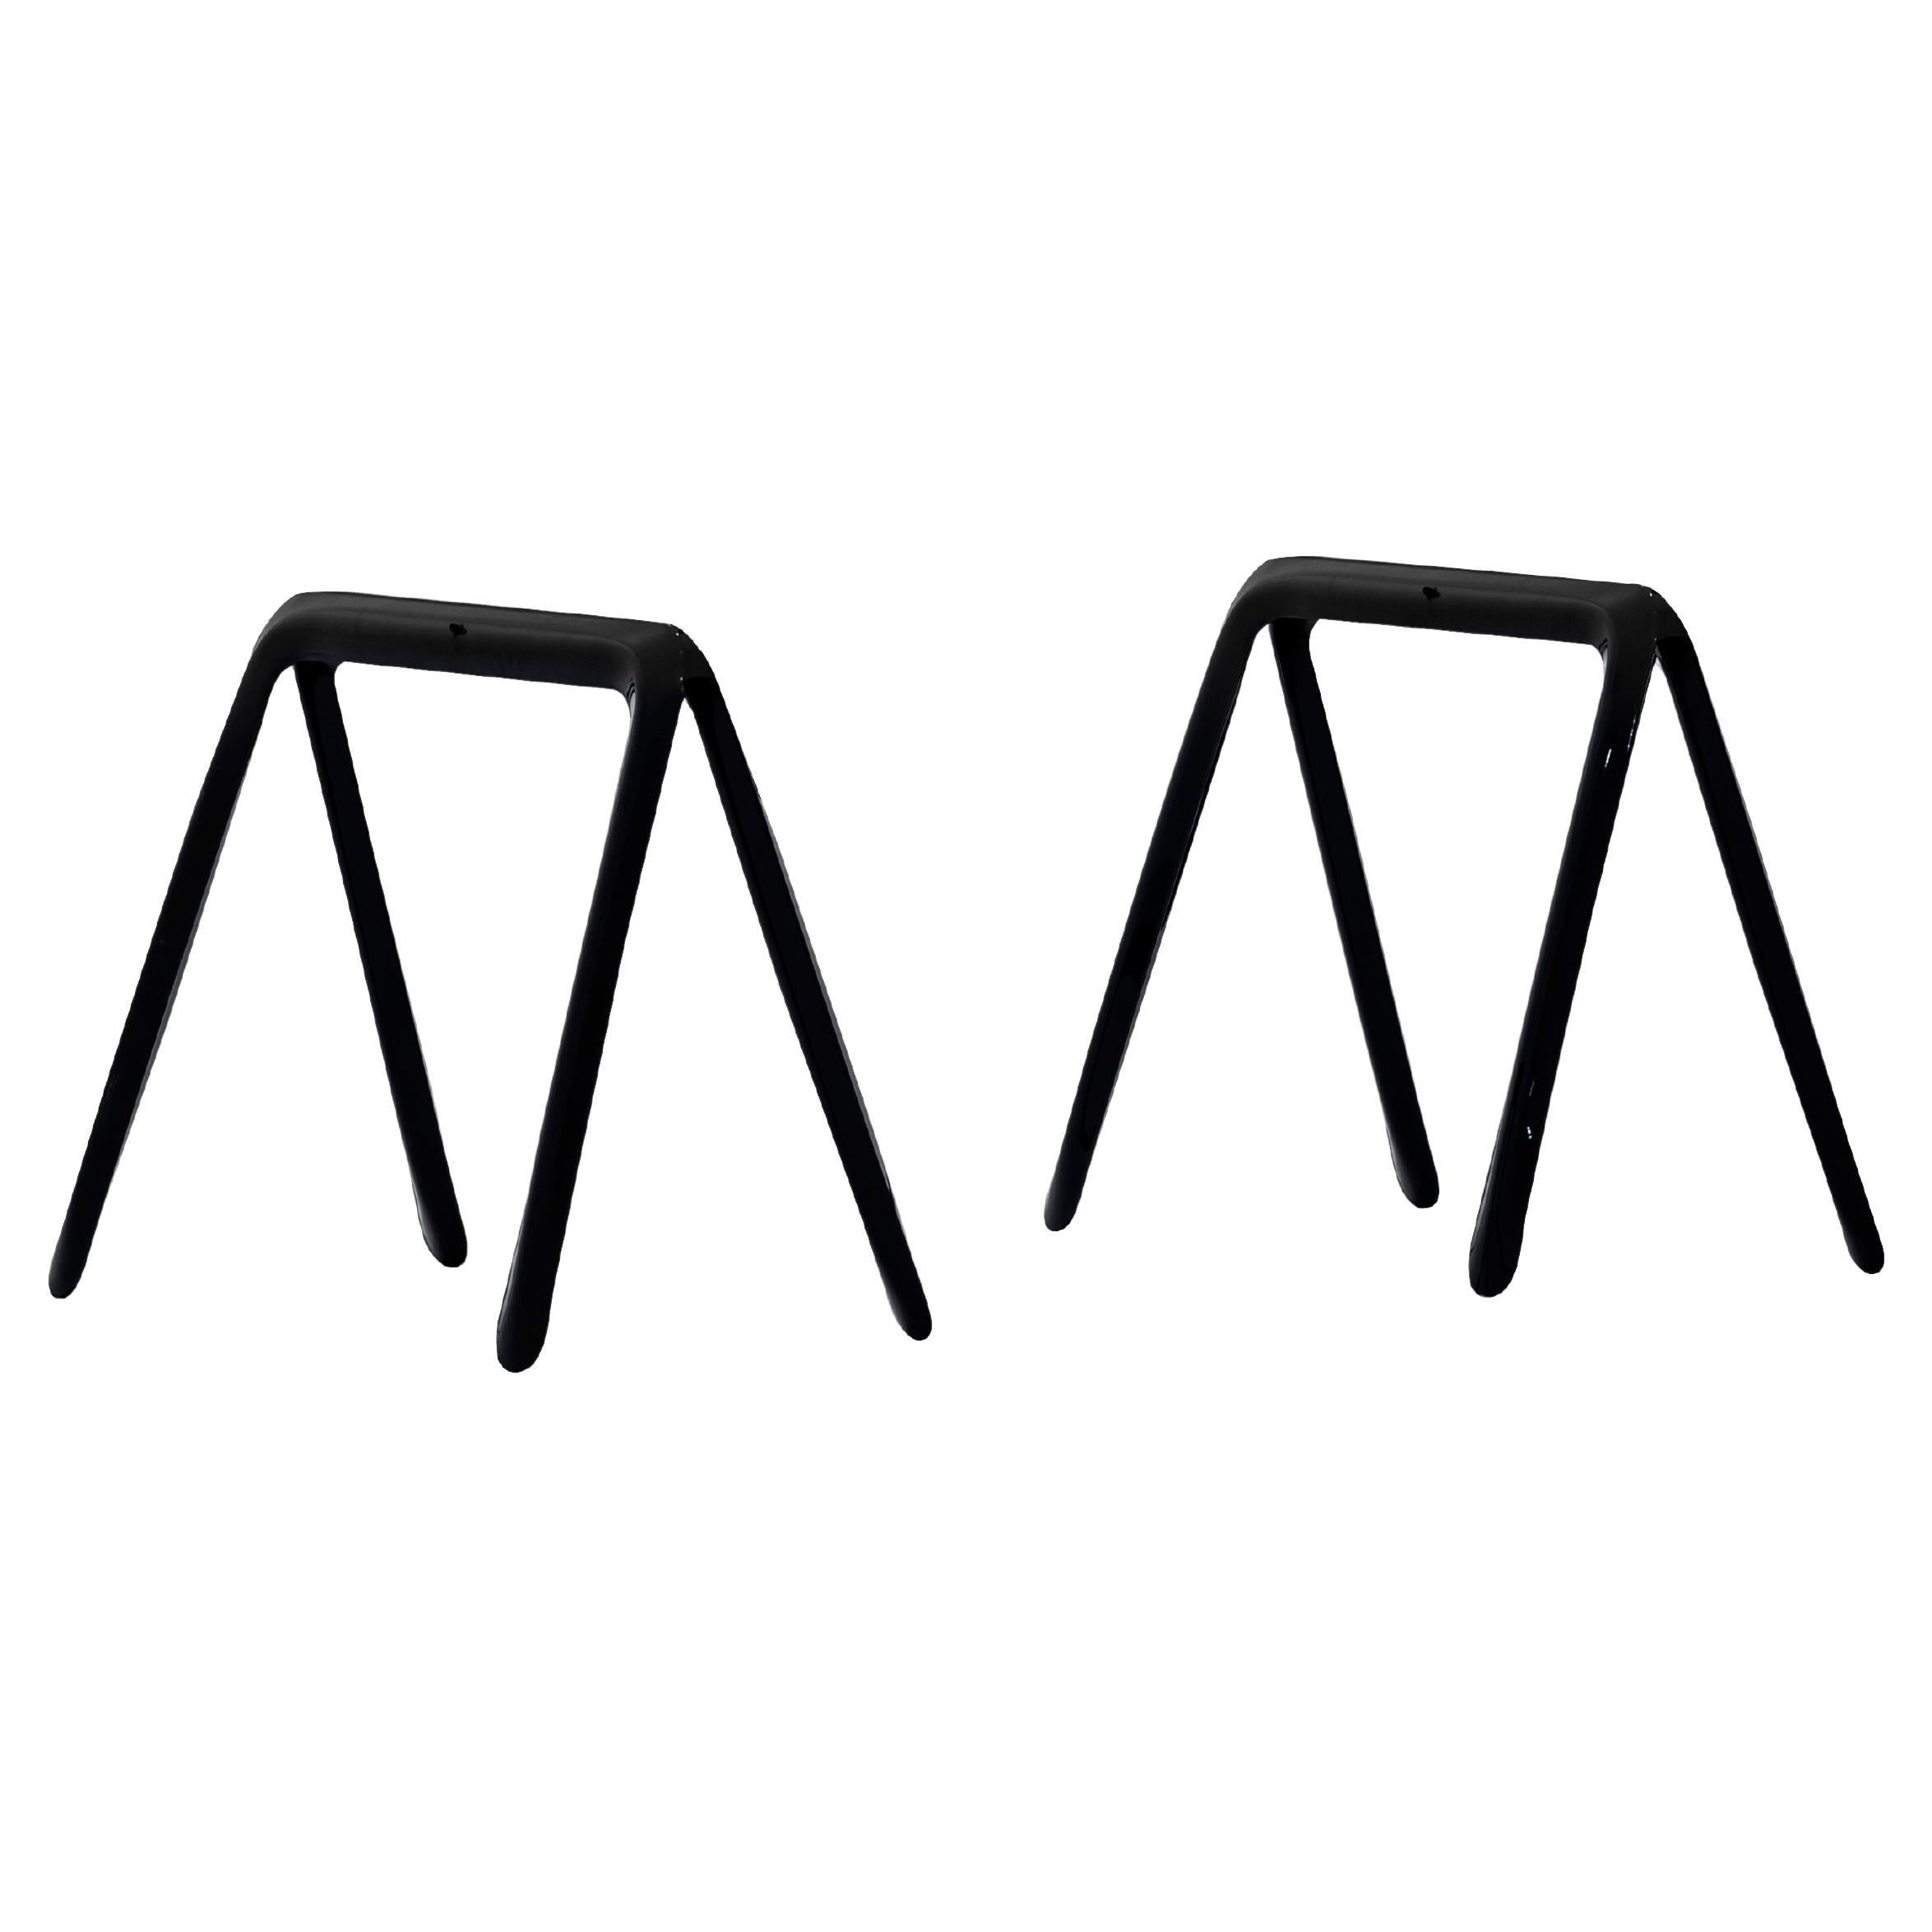 Pair of Koza Trestles in Black Glossy by Zieta For Sale